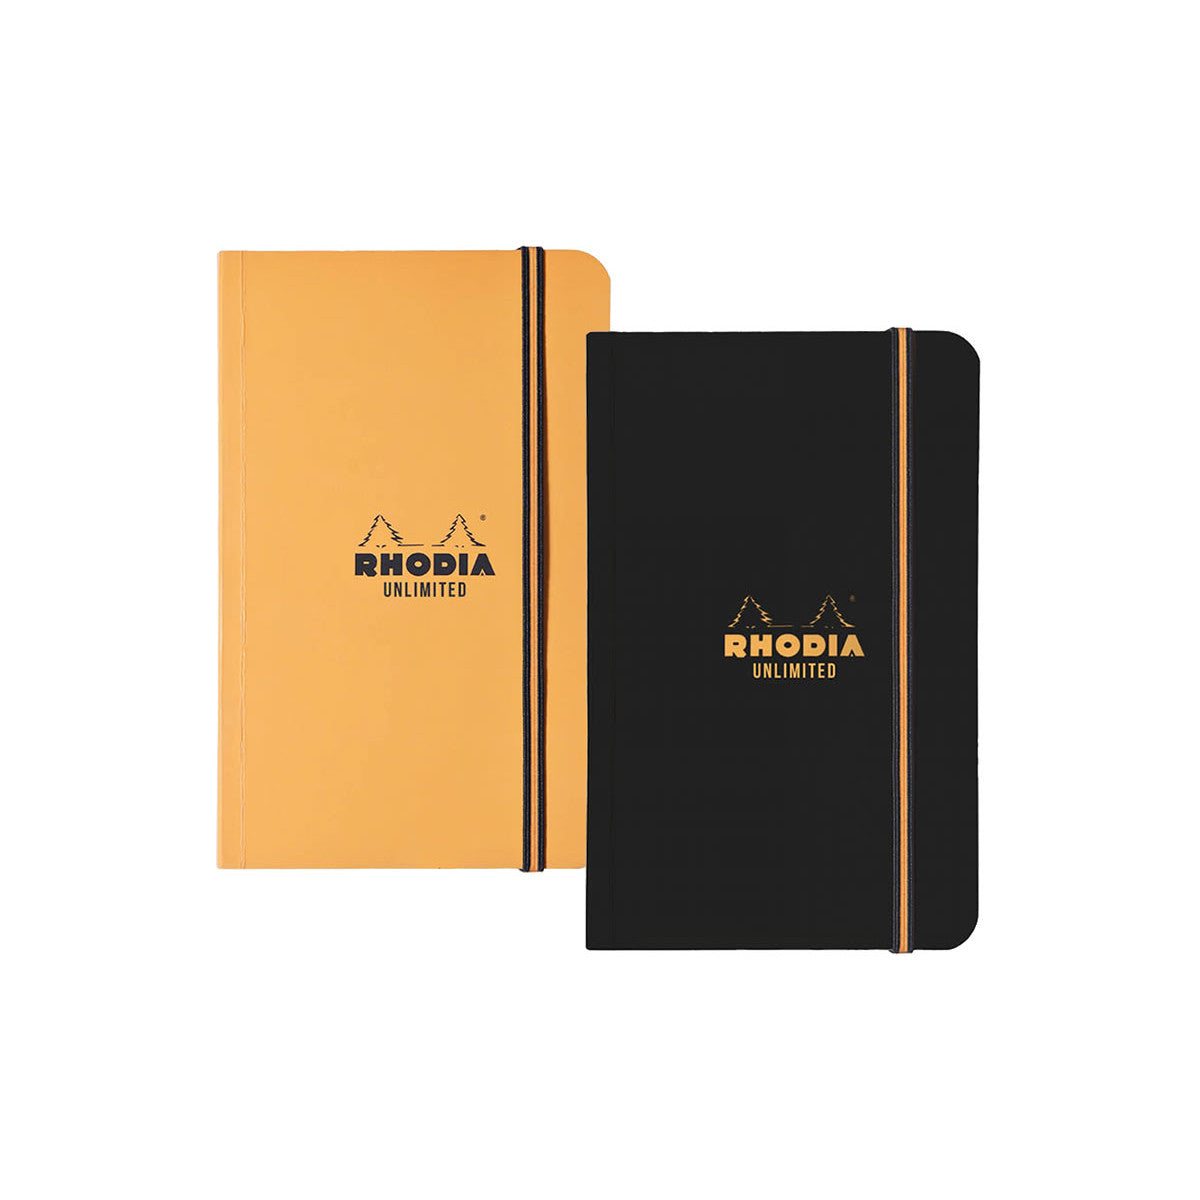 Rhodia "Unlimited” Pocket Notebook - Lined 60 sheets -  3 1/2 x 5 1/2 - Orange cover | Atlas Stationers.